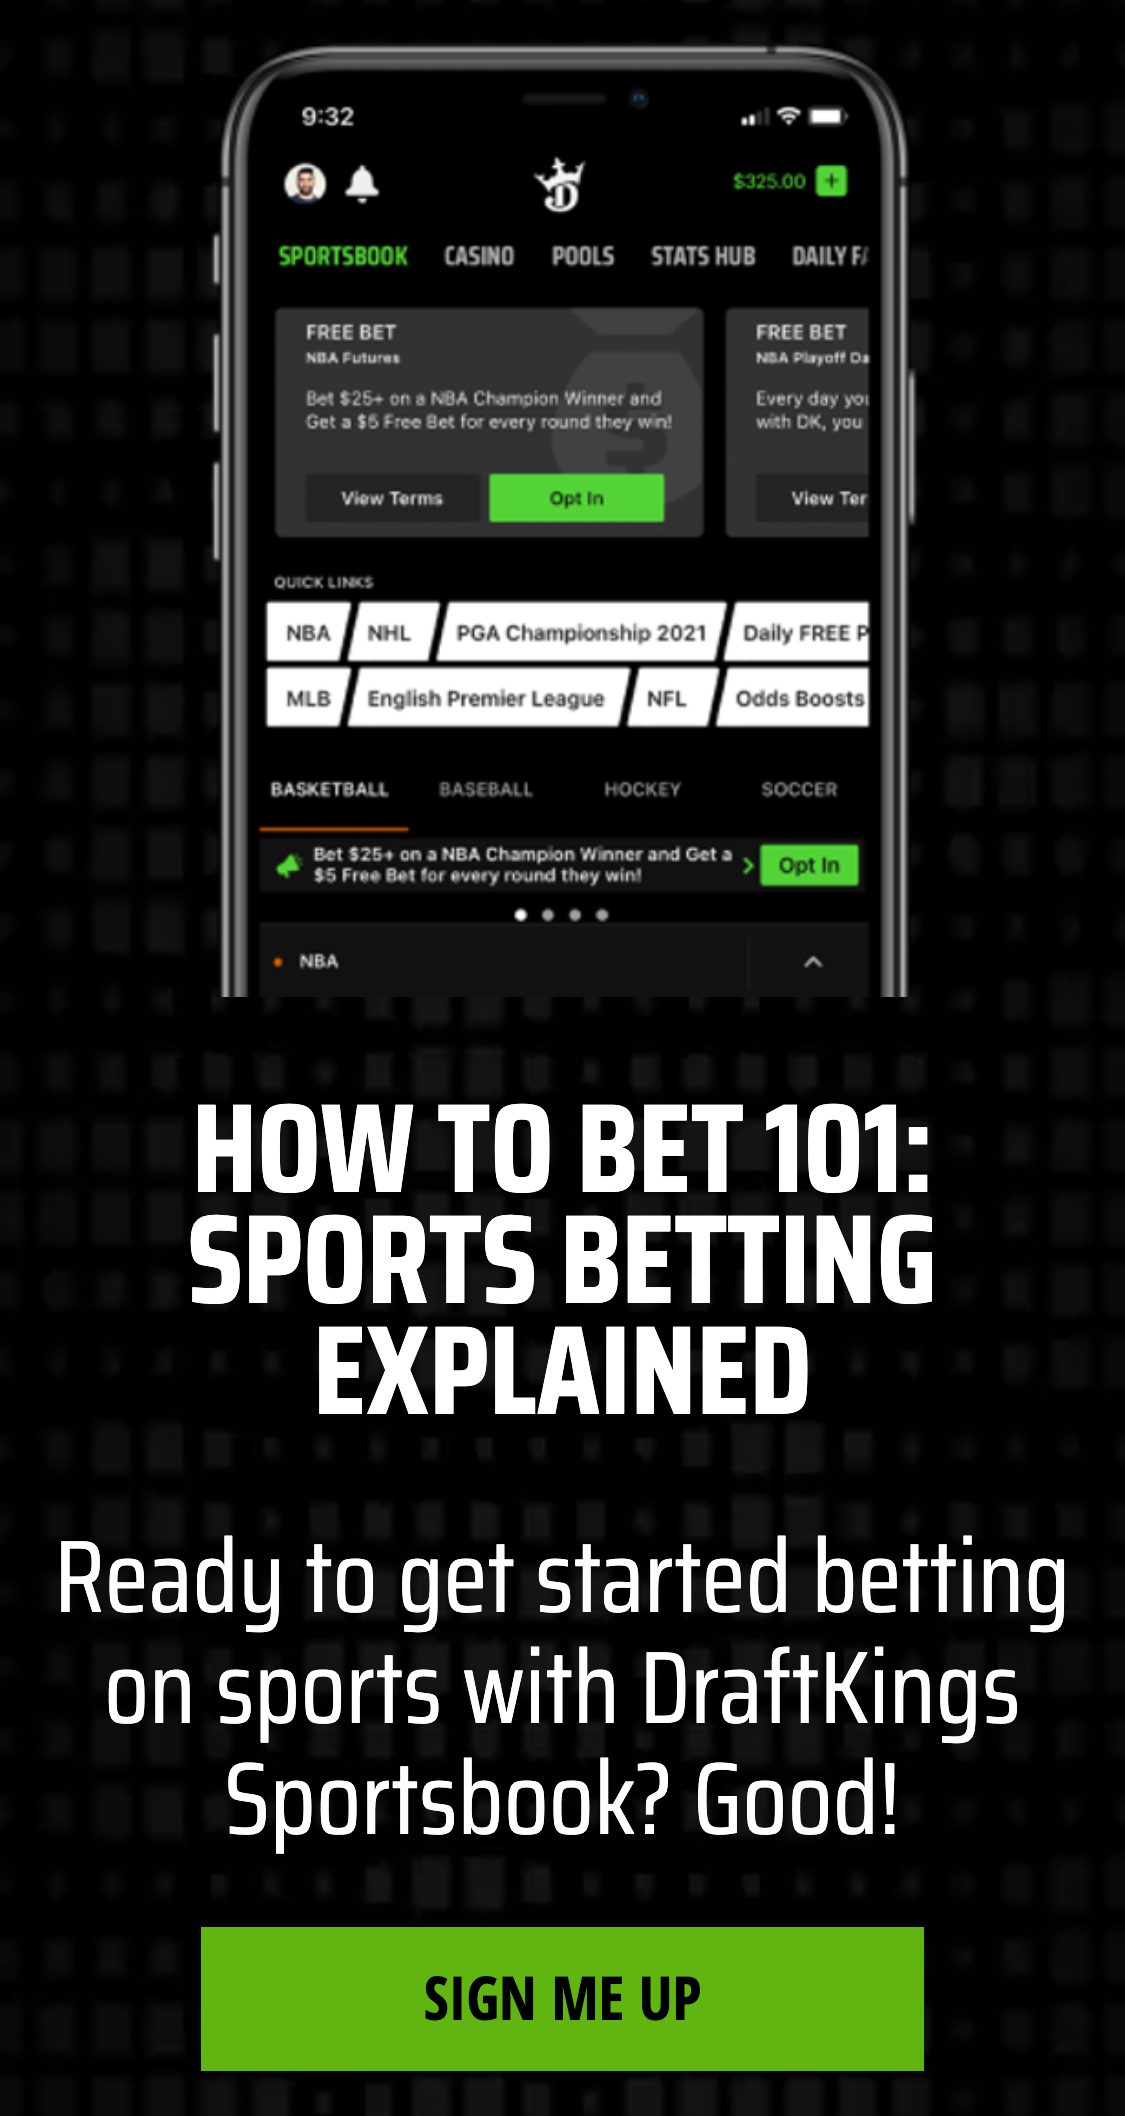 How to bet at DraftKings Sportsbook